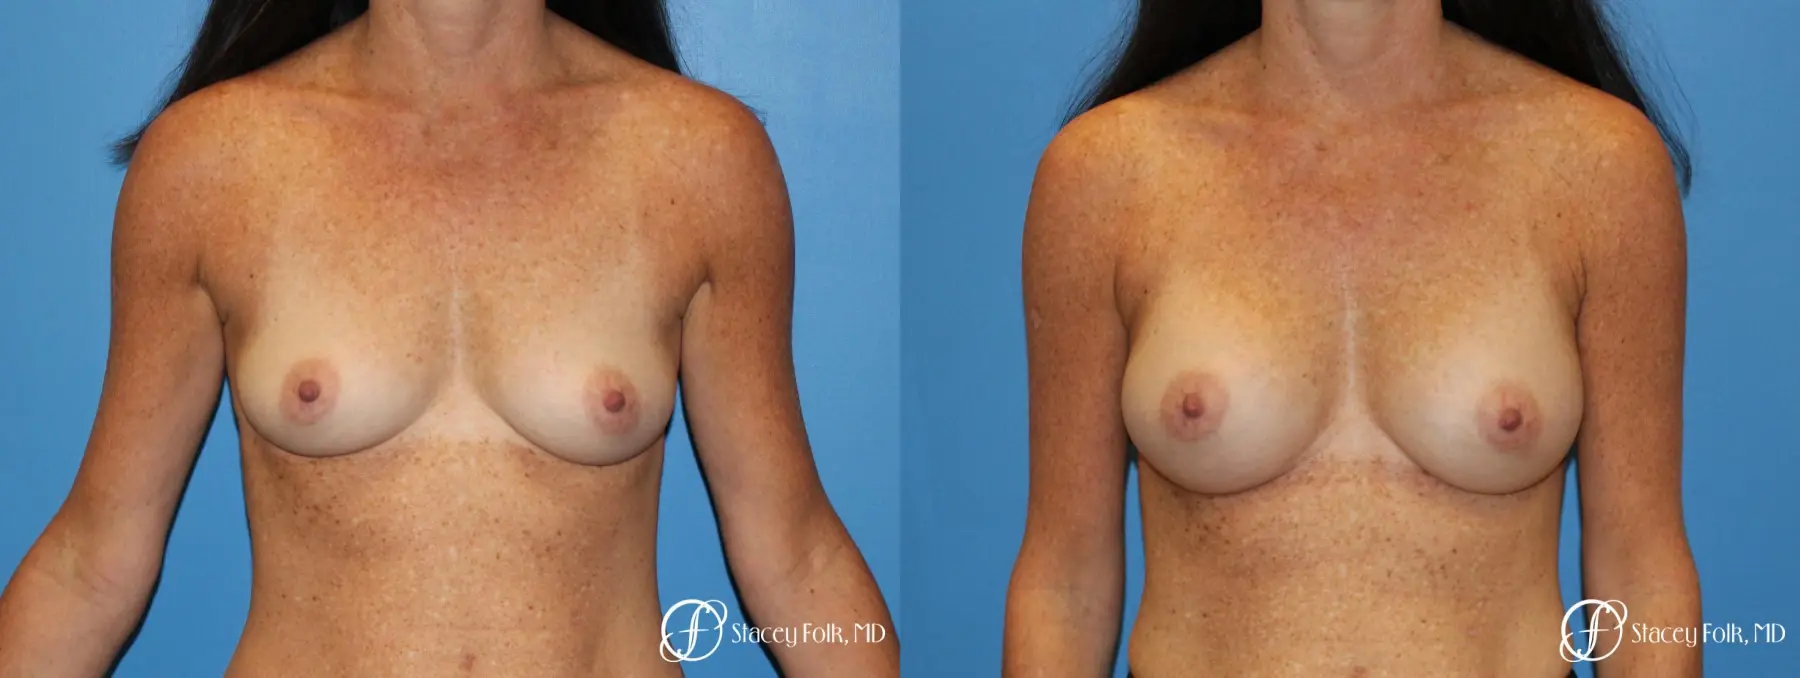 Denver Breast Augmentation using Sientra Silicone Gel Breast Implants 9362 - Before and After